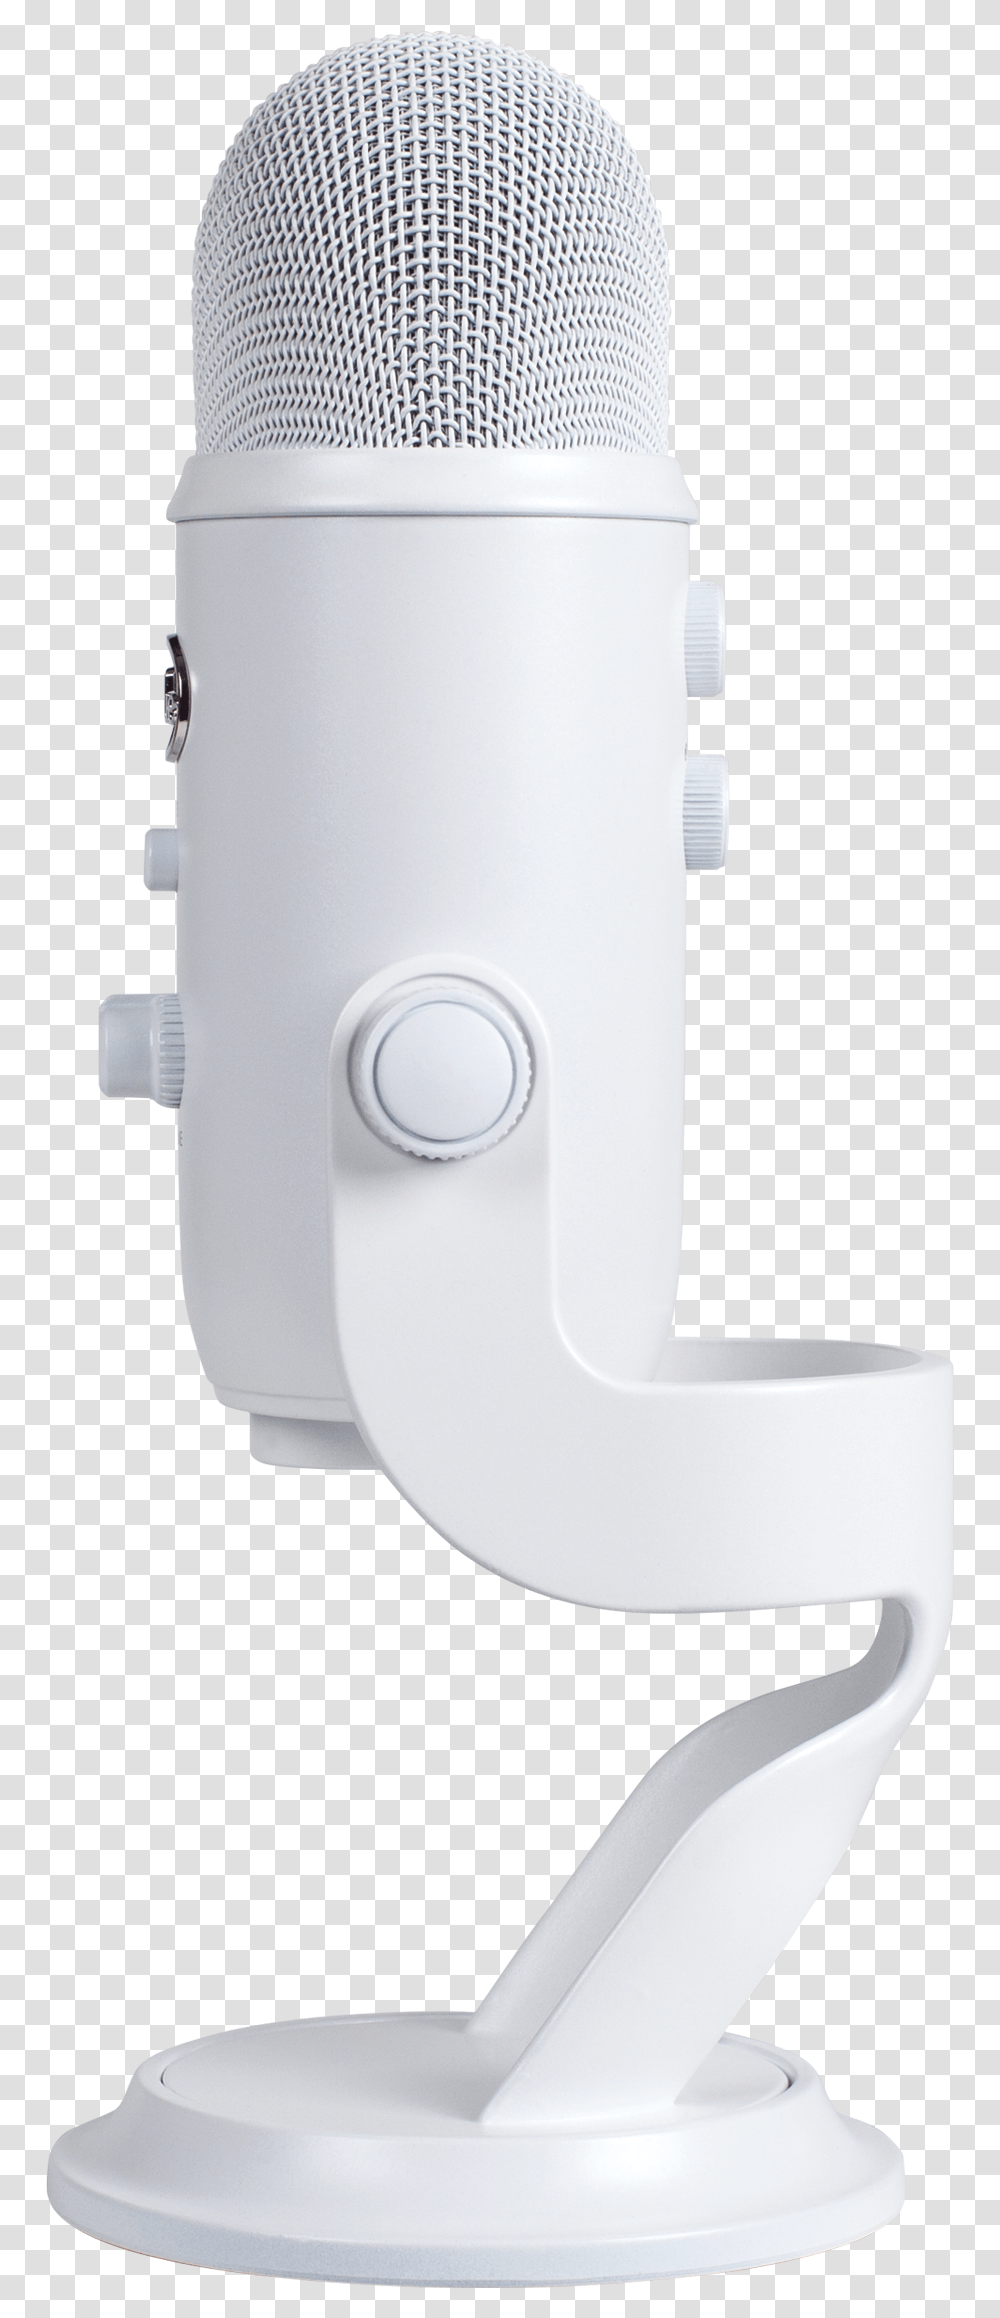 Blue Yeti Usb Microphone Blue Yeti Whiteout, Milk, Beverage, Drink, Electrical Device Transparent Png